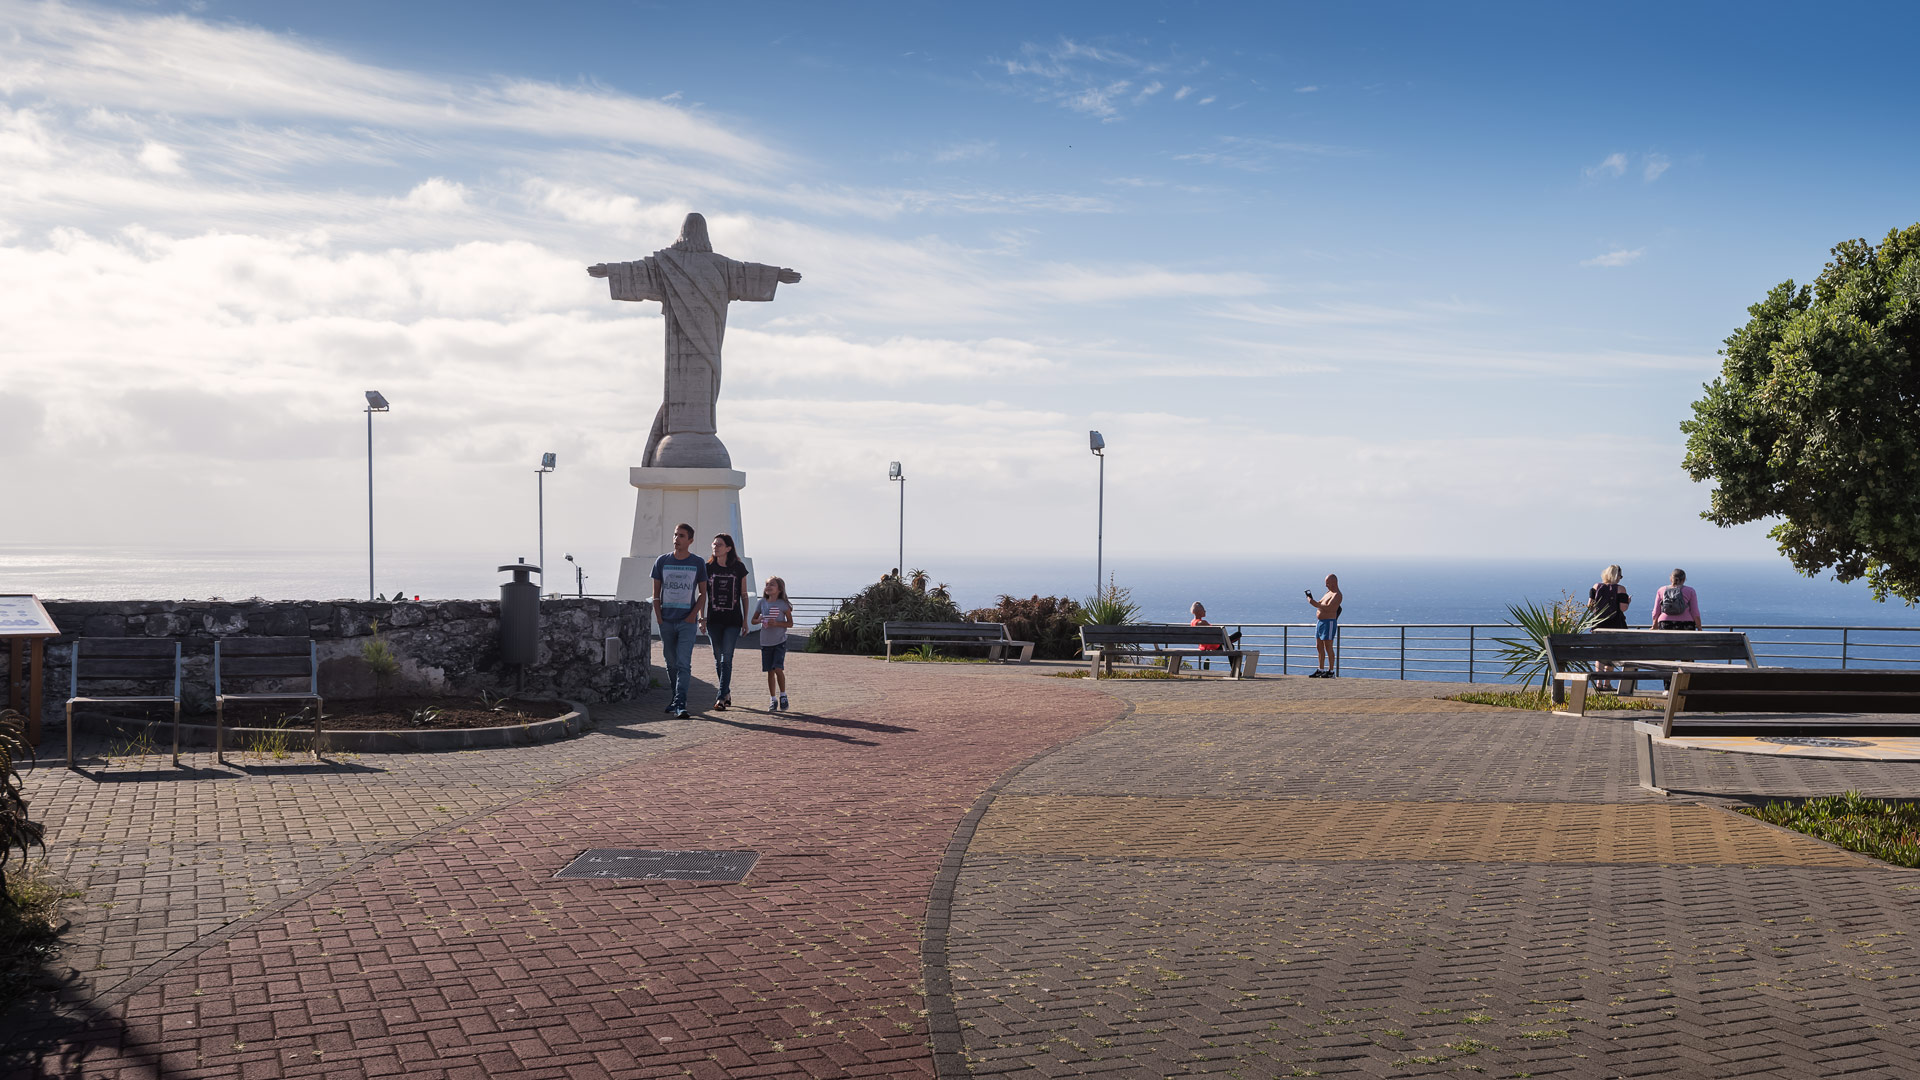 Must-See Attractions for Madeira Viagens - https://traveljiffy.com.ng/discover-the-top-15-must-see-attractions-for-madeira-viagens/